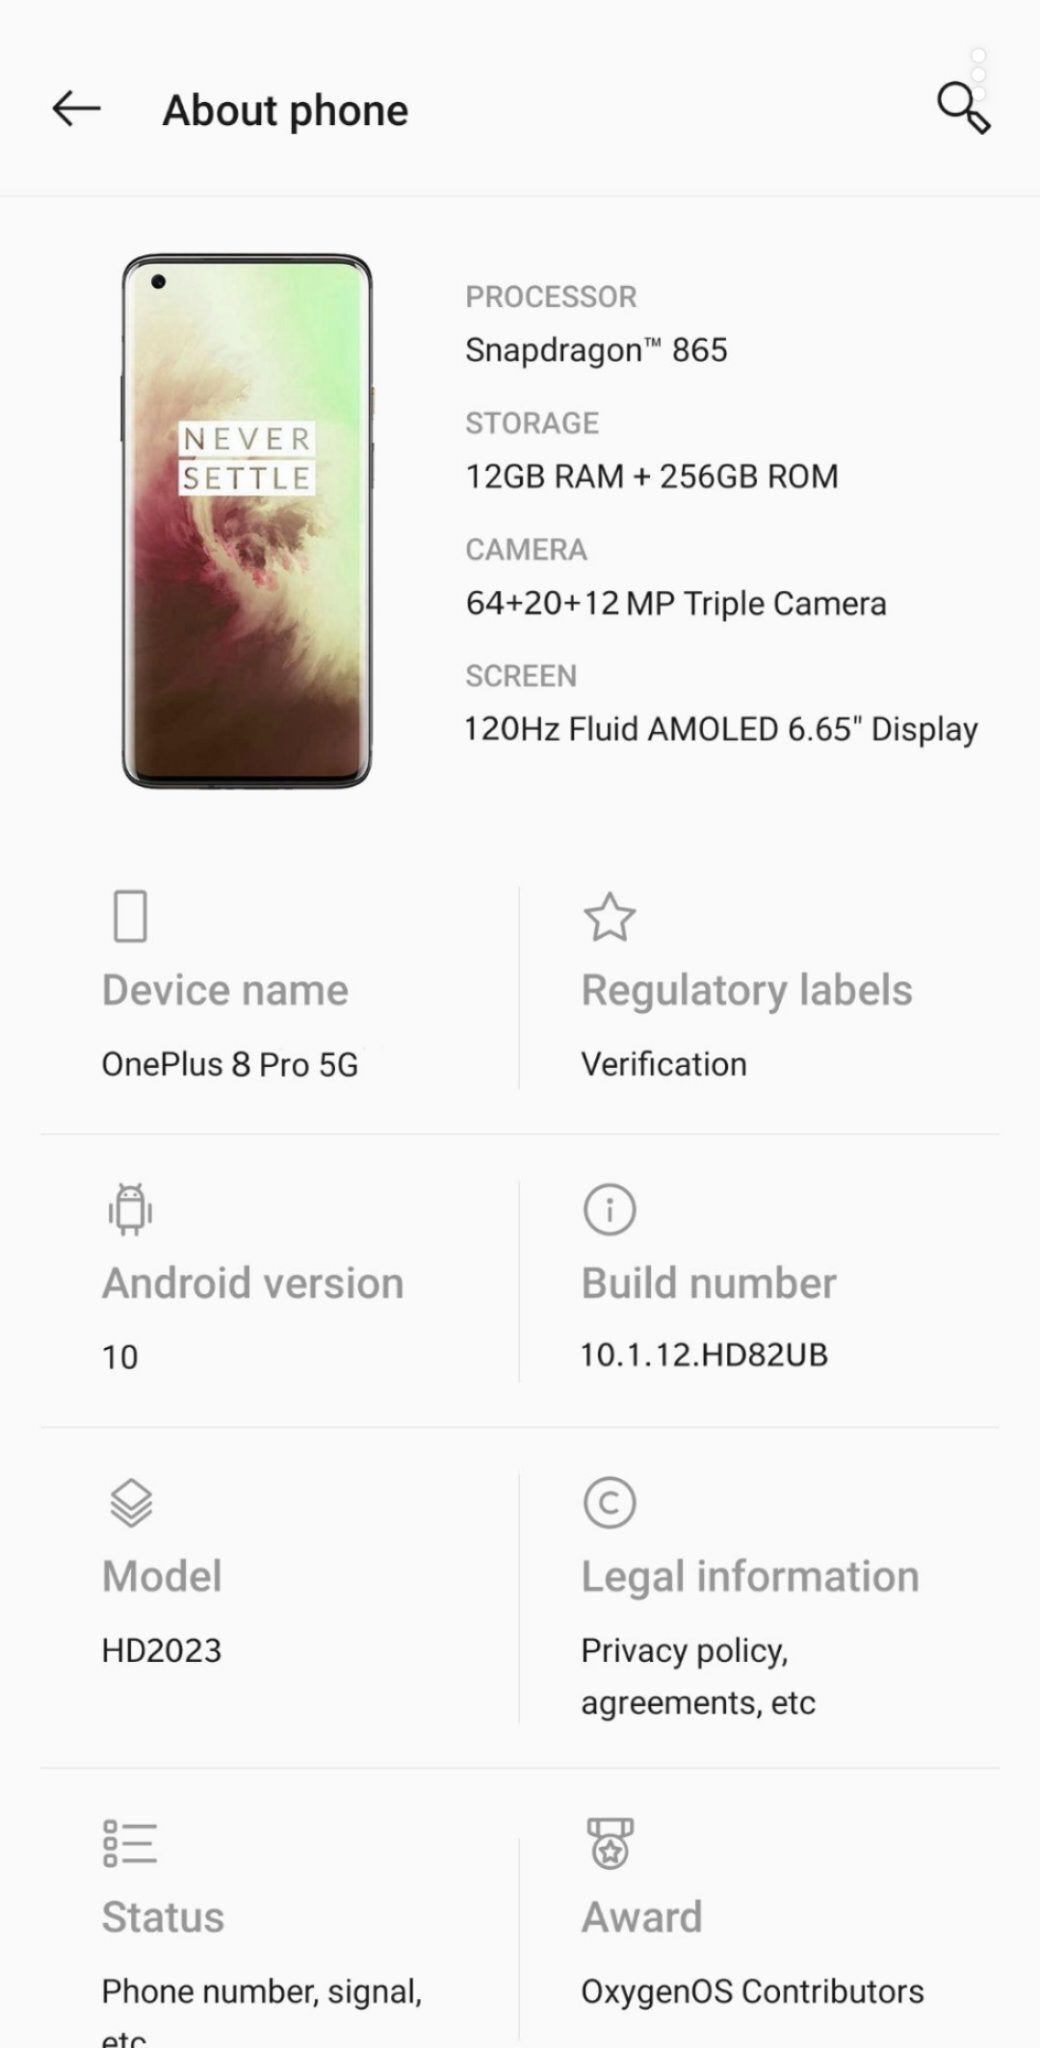 The OnePlus 8 and 8 Pro specs and design leaks get a match